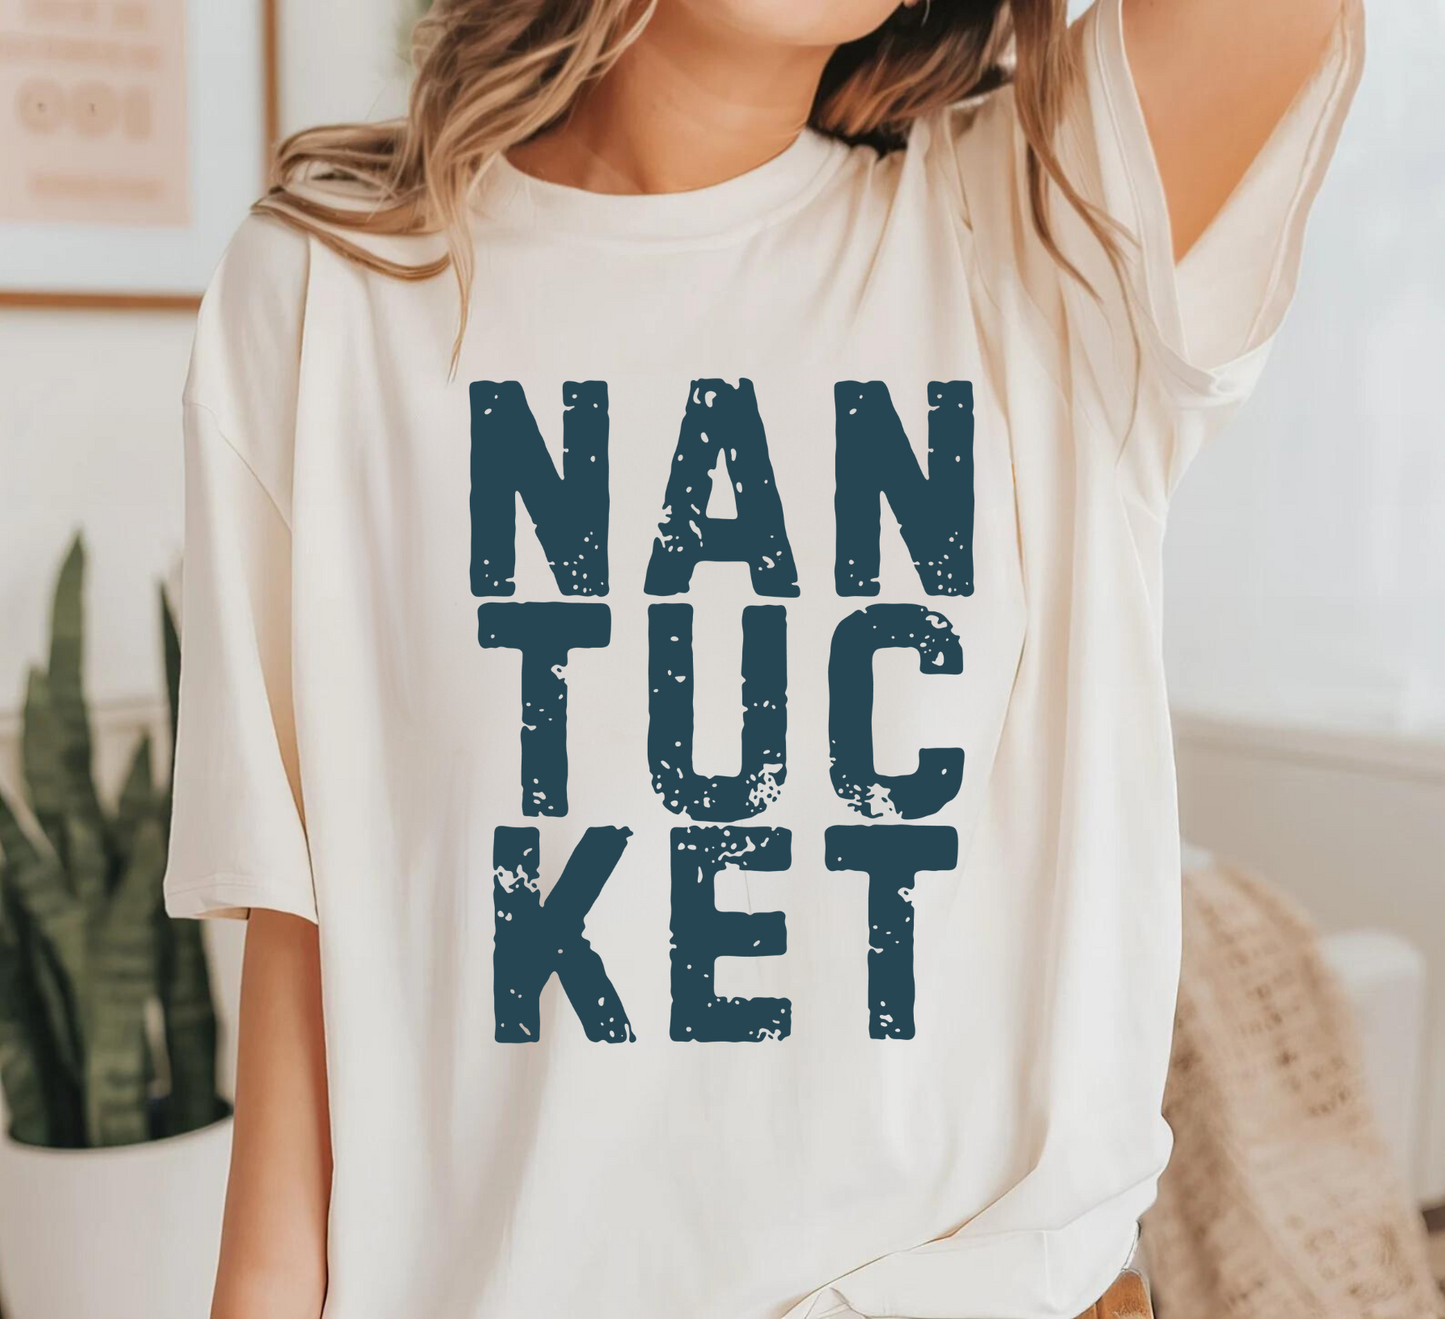 Nantucket T-Shirt - Comfort Colors 1717, 100% Ring-Spun Cotton, Relaxed Fit